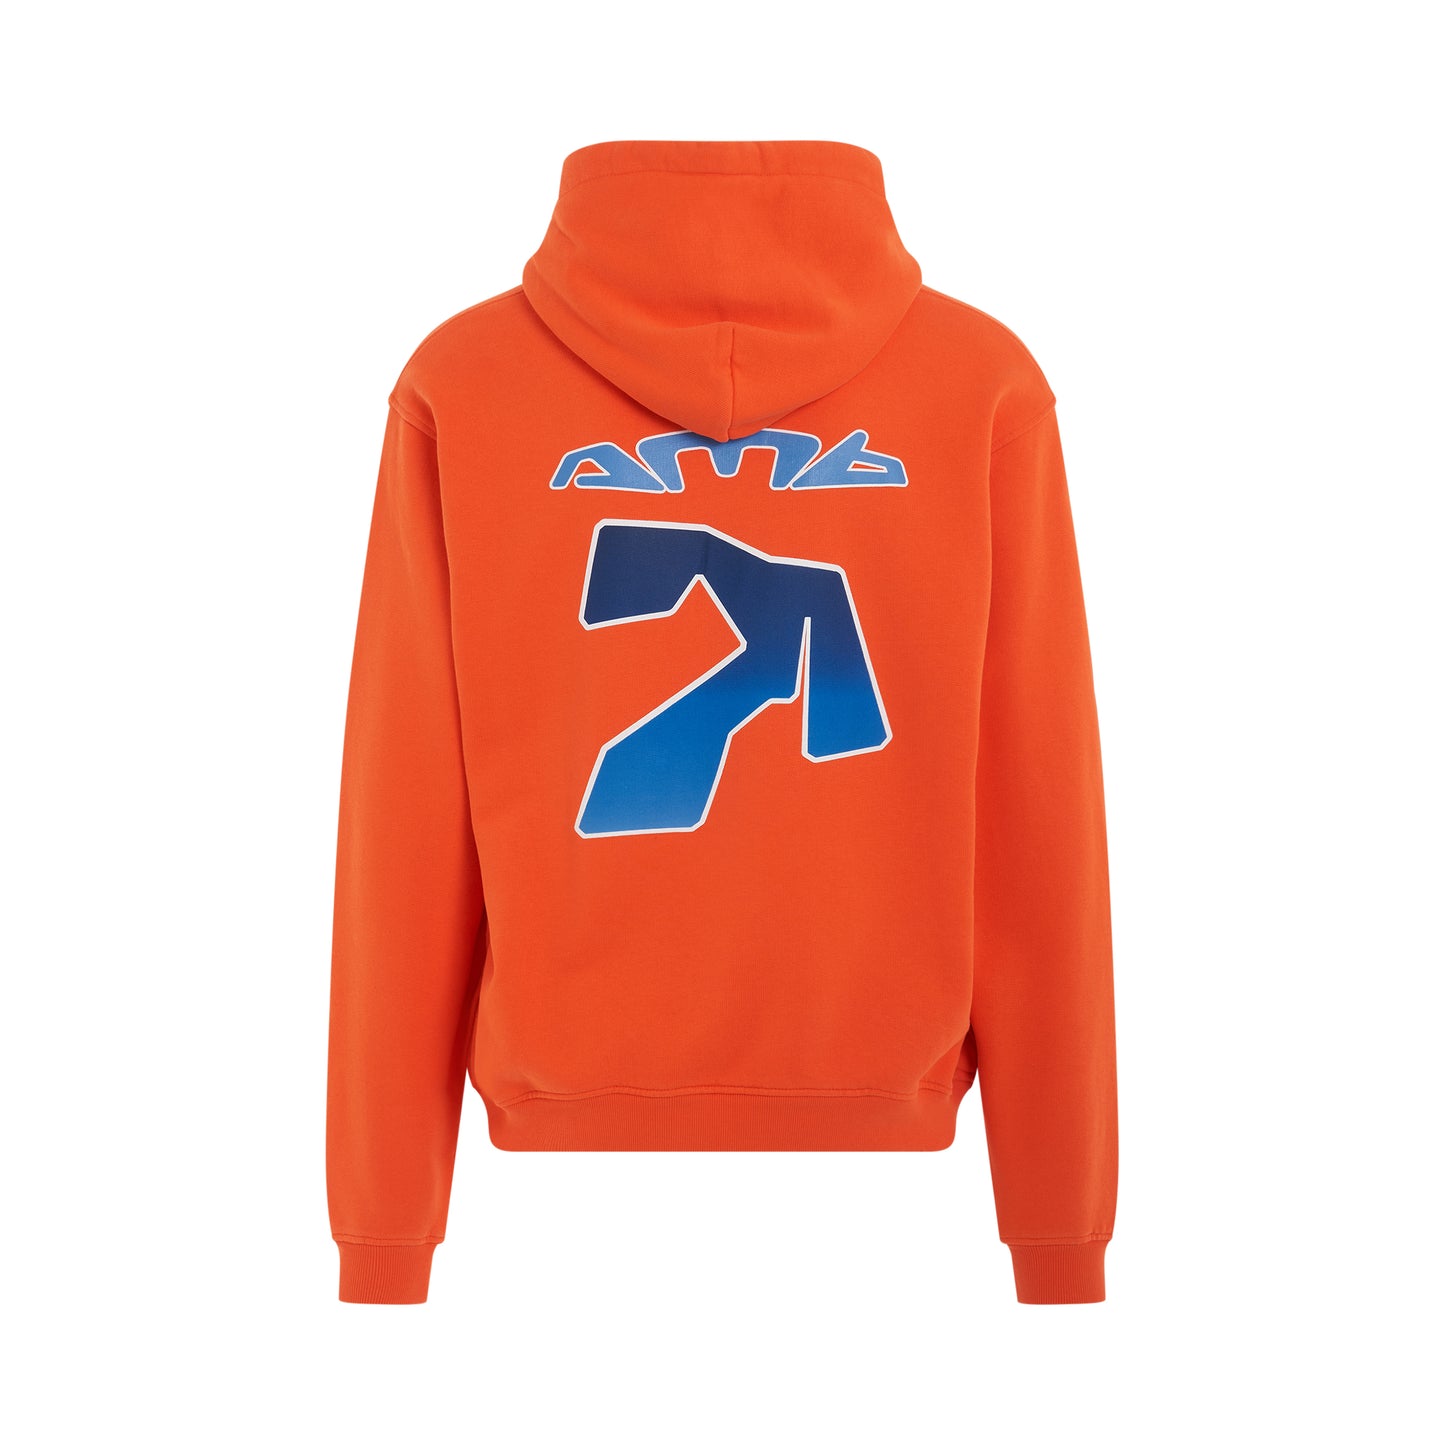 Back Gradation Graphic Hoodie in Flame/Insignia Blue